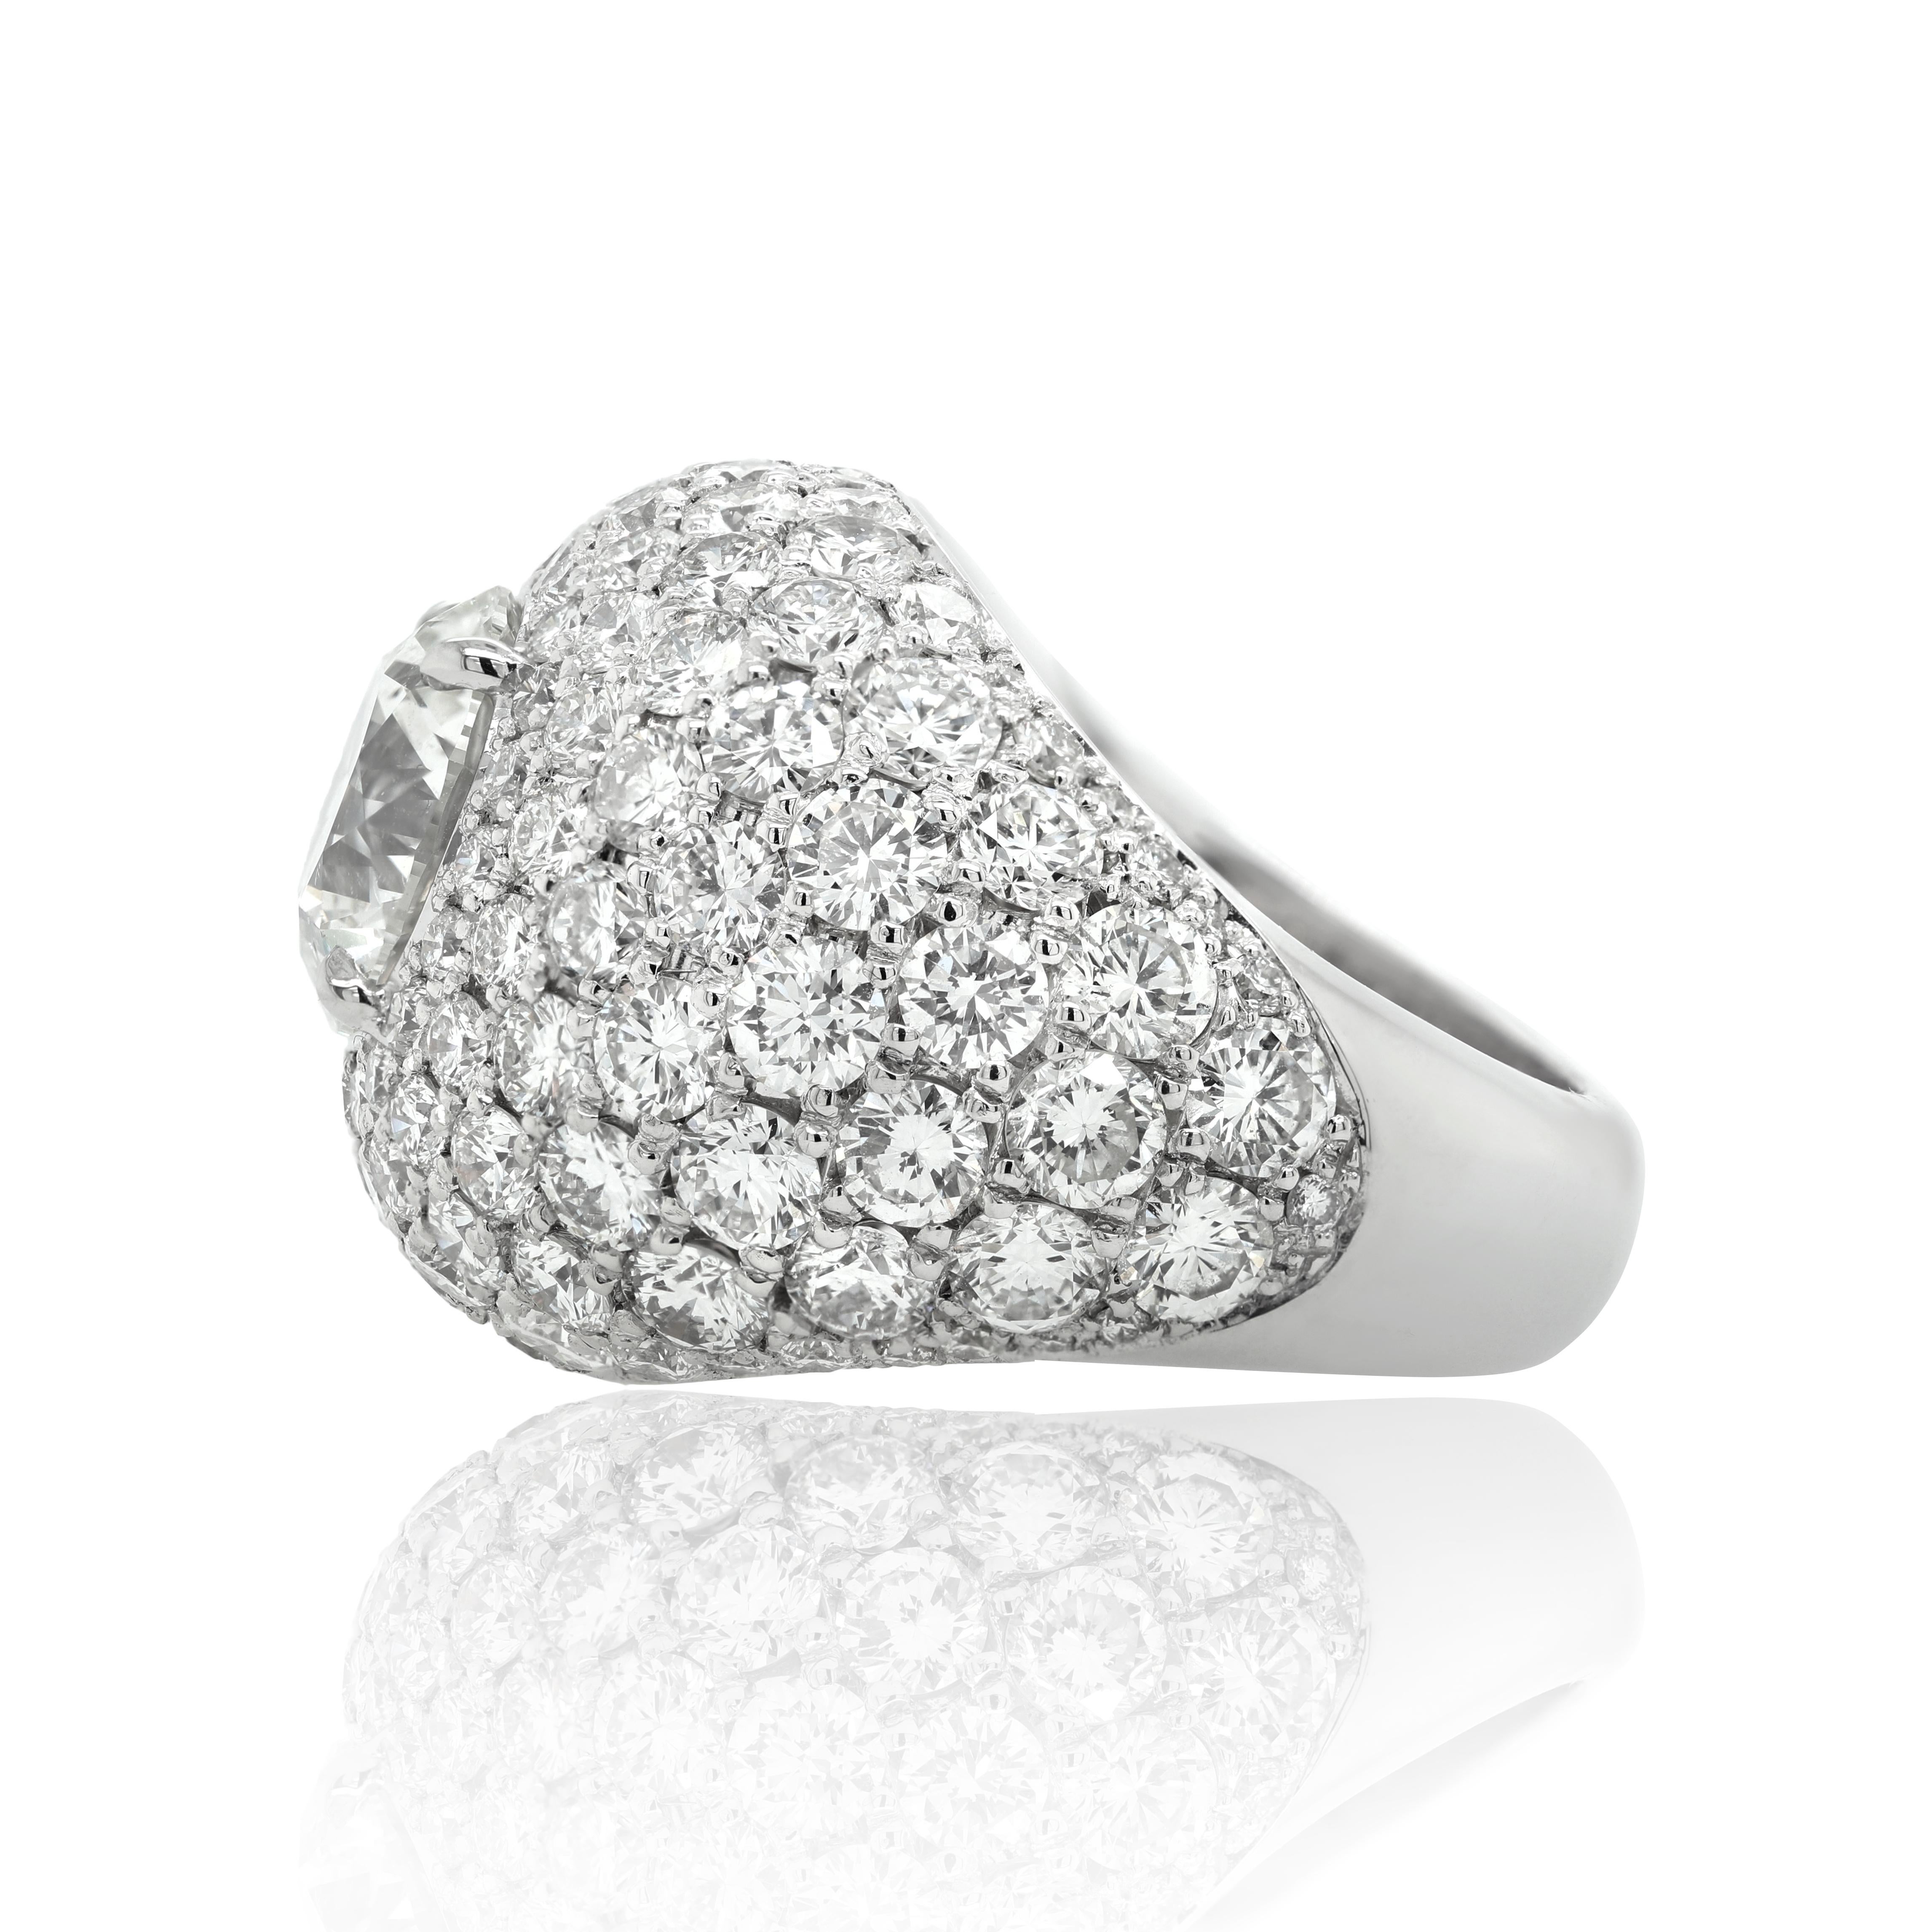 Diana M. 14.66 Carats GIA Certified Diamond Ring In New Condition For Sale In New York, NY